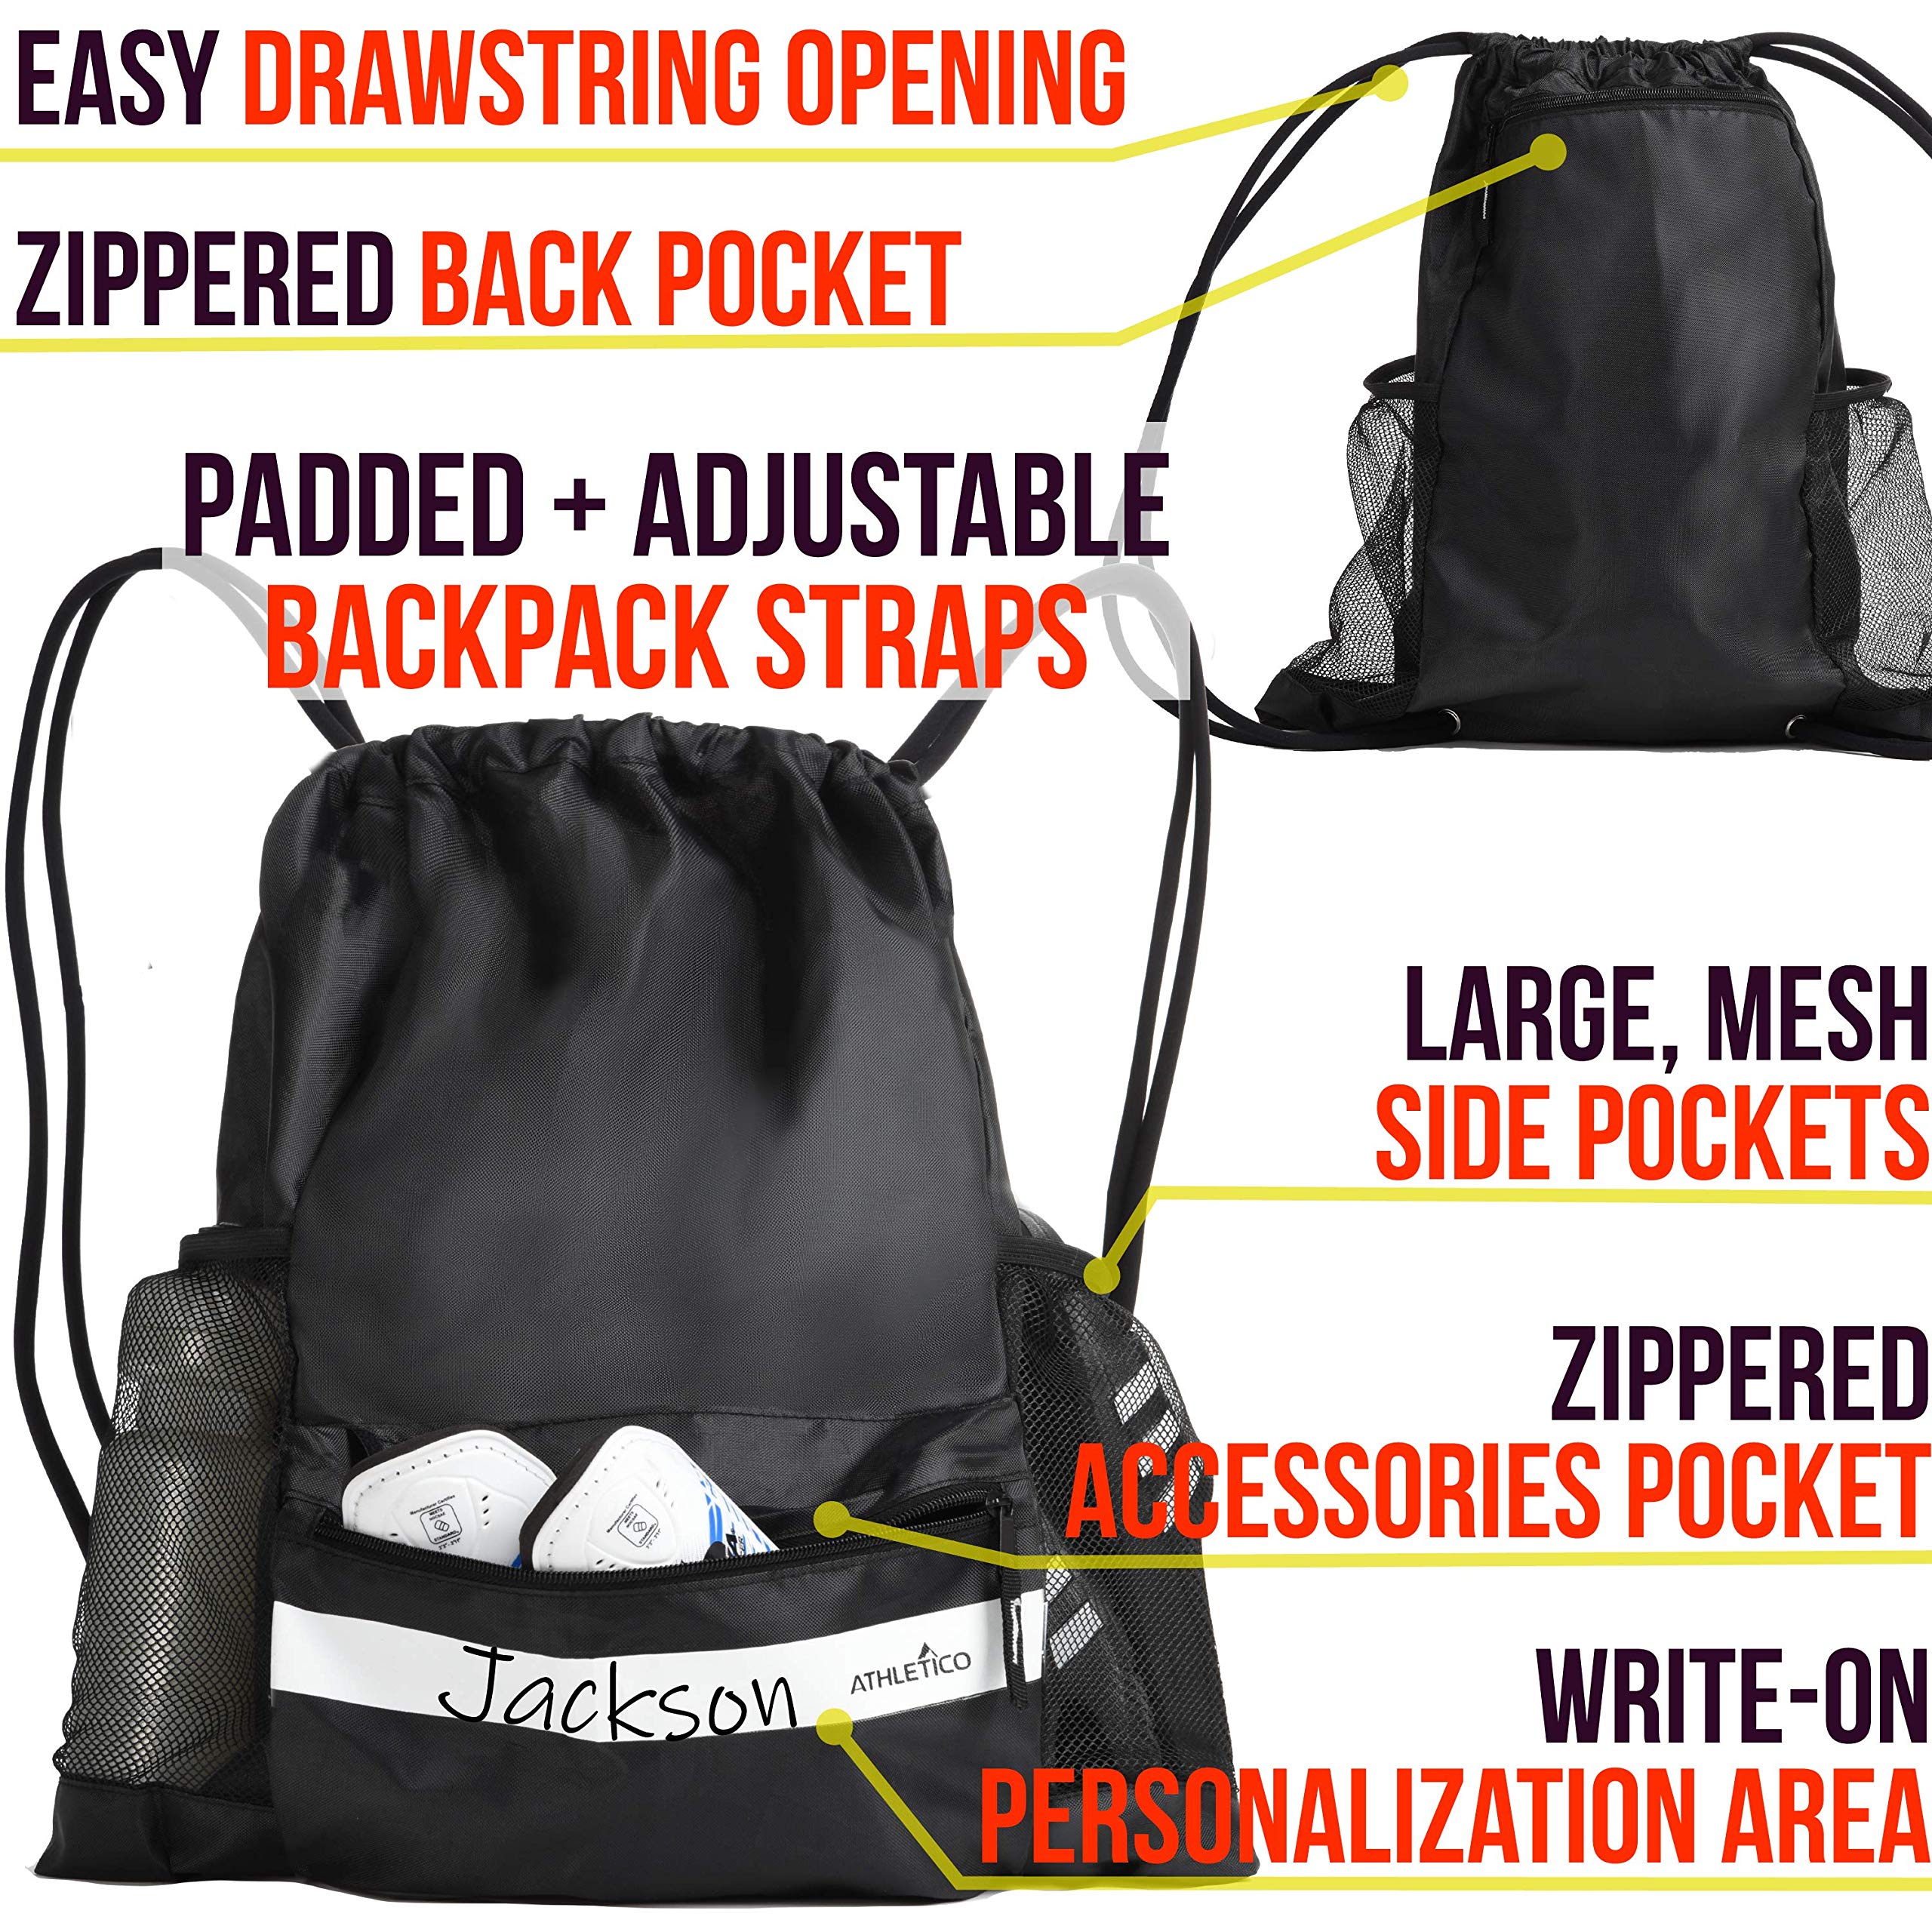 Athletico Drawstring Soccer Bag - Soccer Backpack For Boys or Girls Can Also Carry Basketball or Volleyball  - Like New